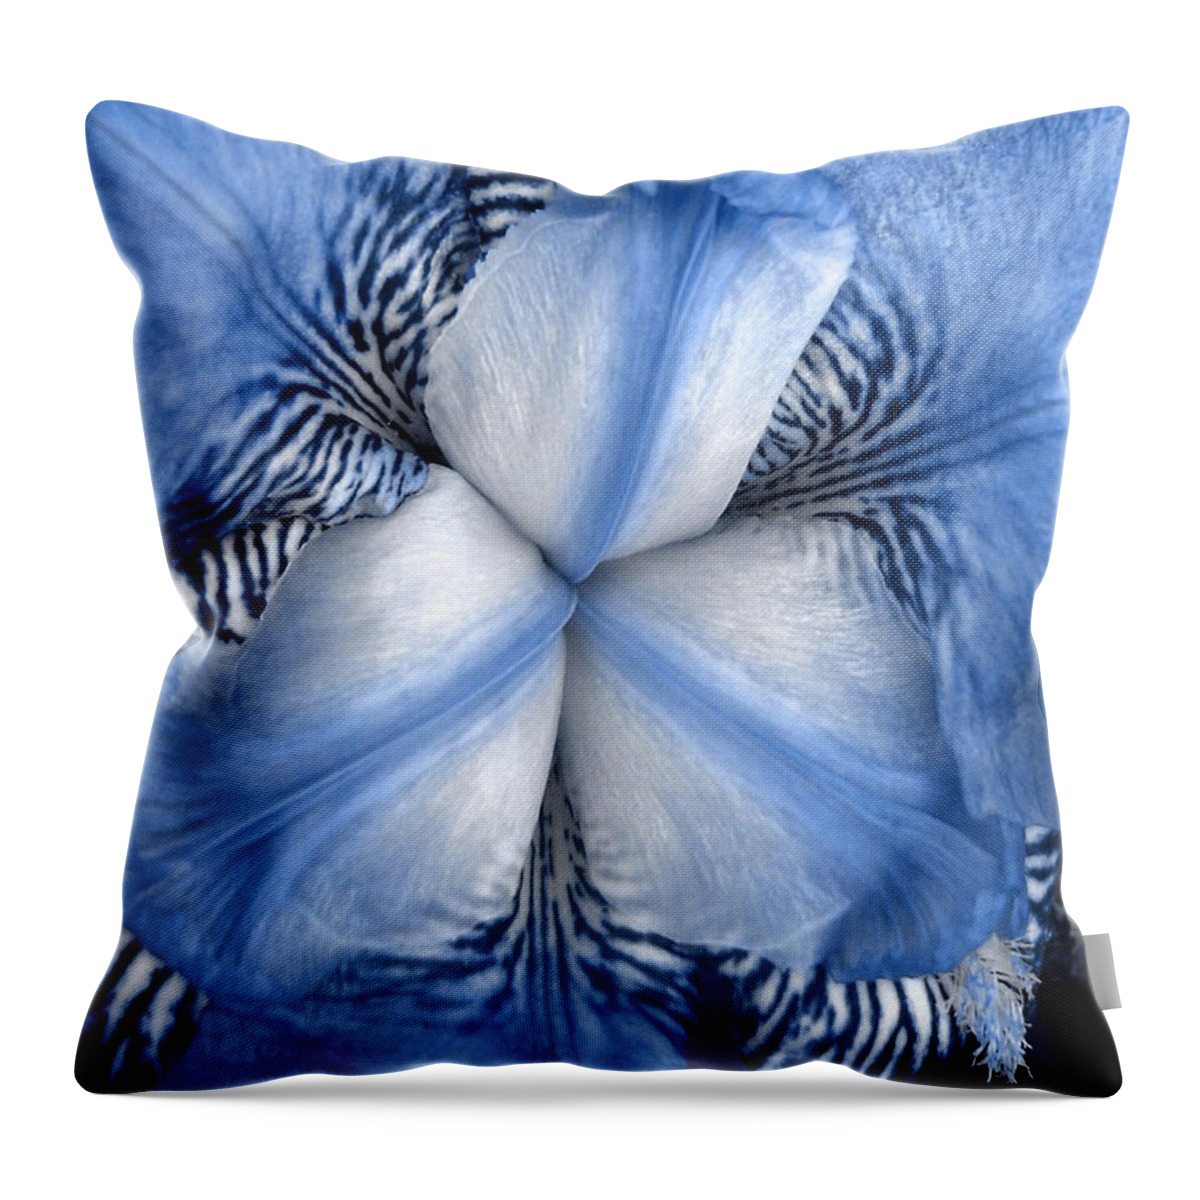 Jphotography Throw Pillow featuring the photograph Blue Tiger Iris by Shelley Jones